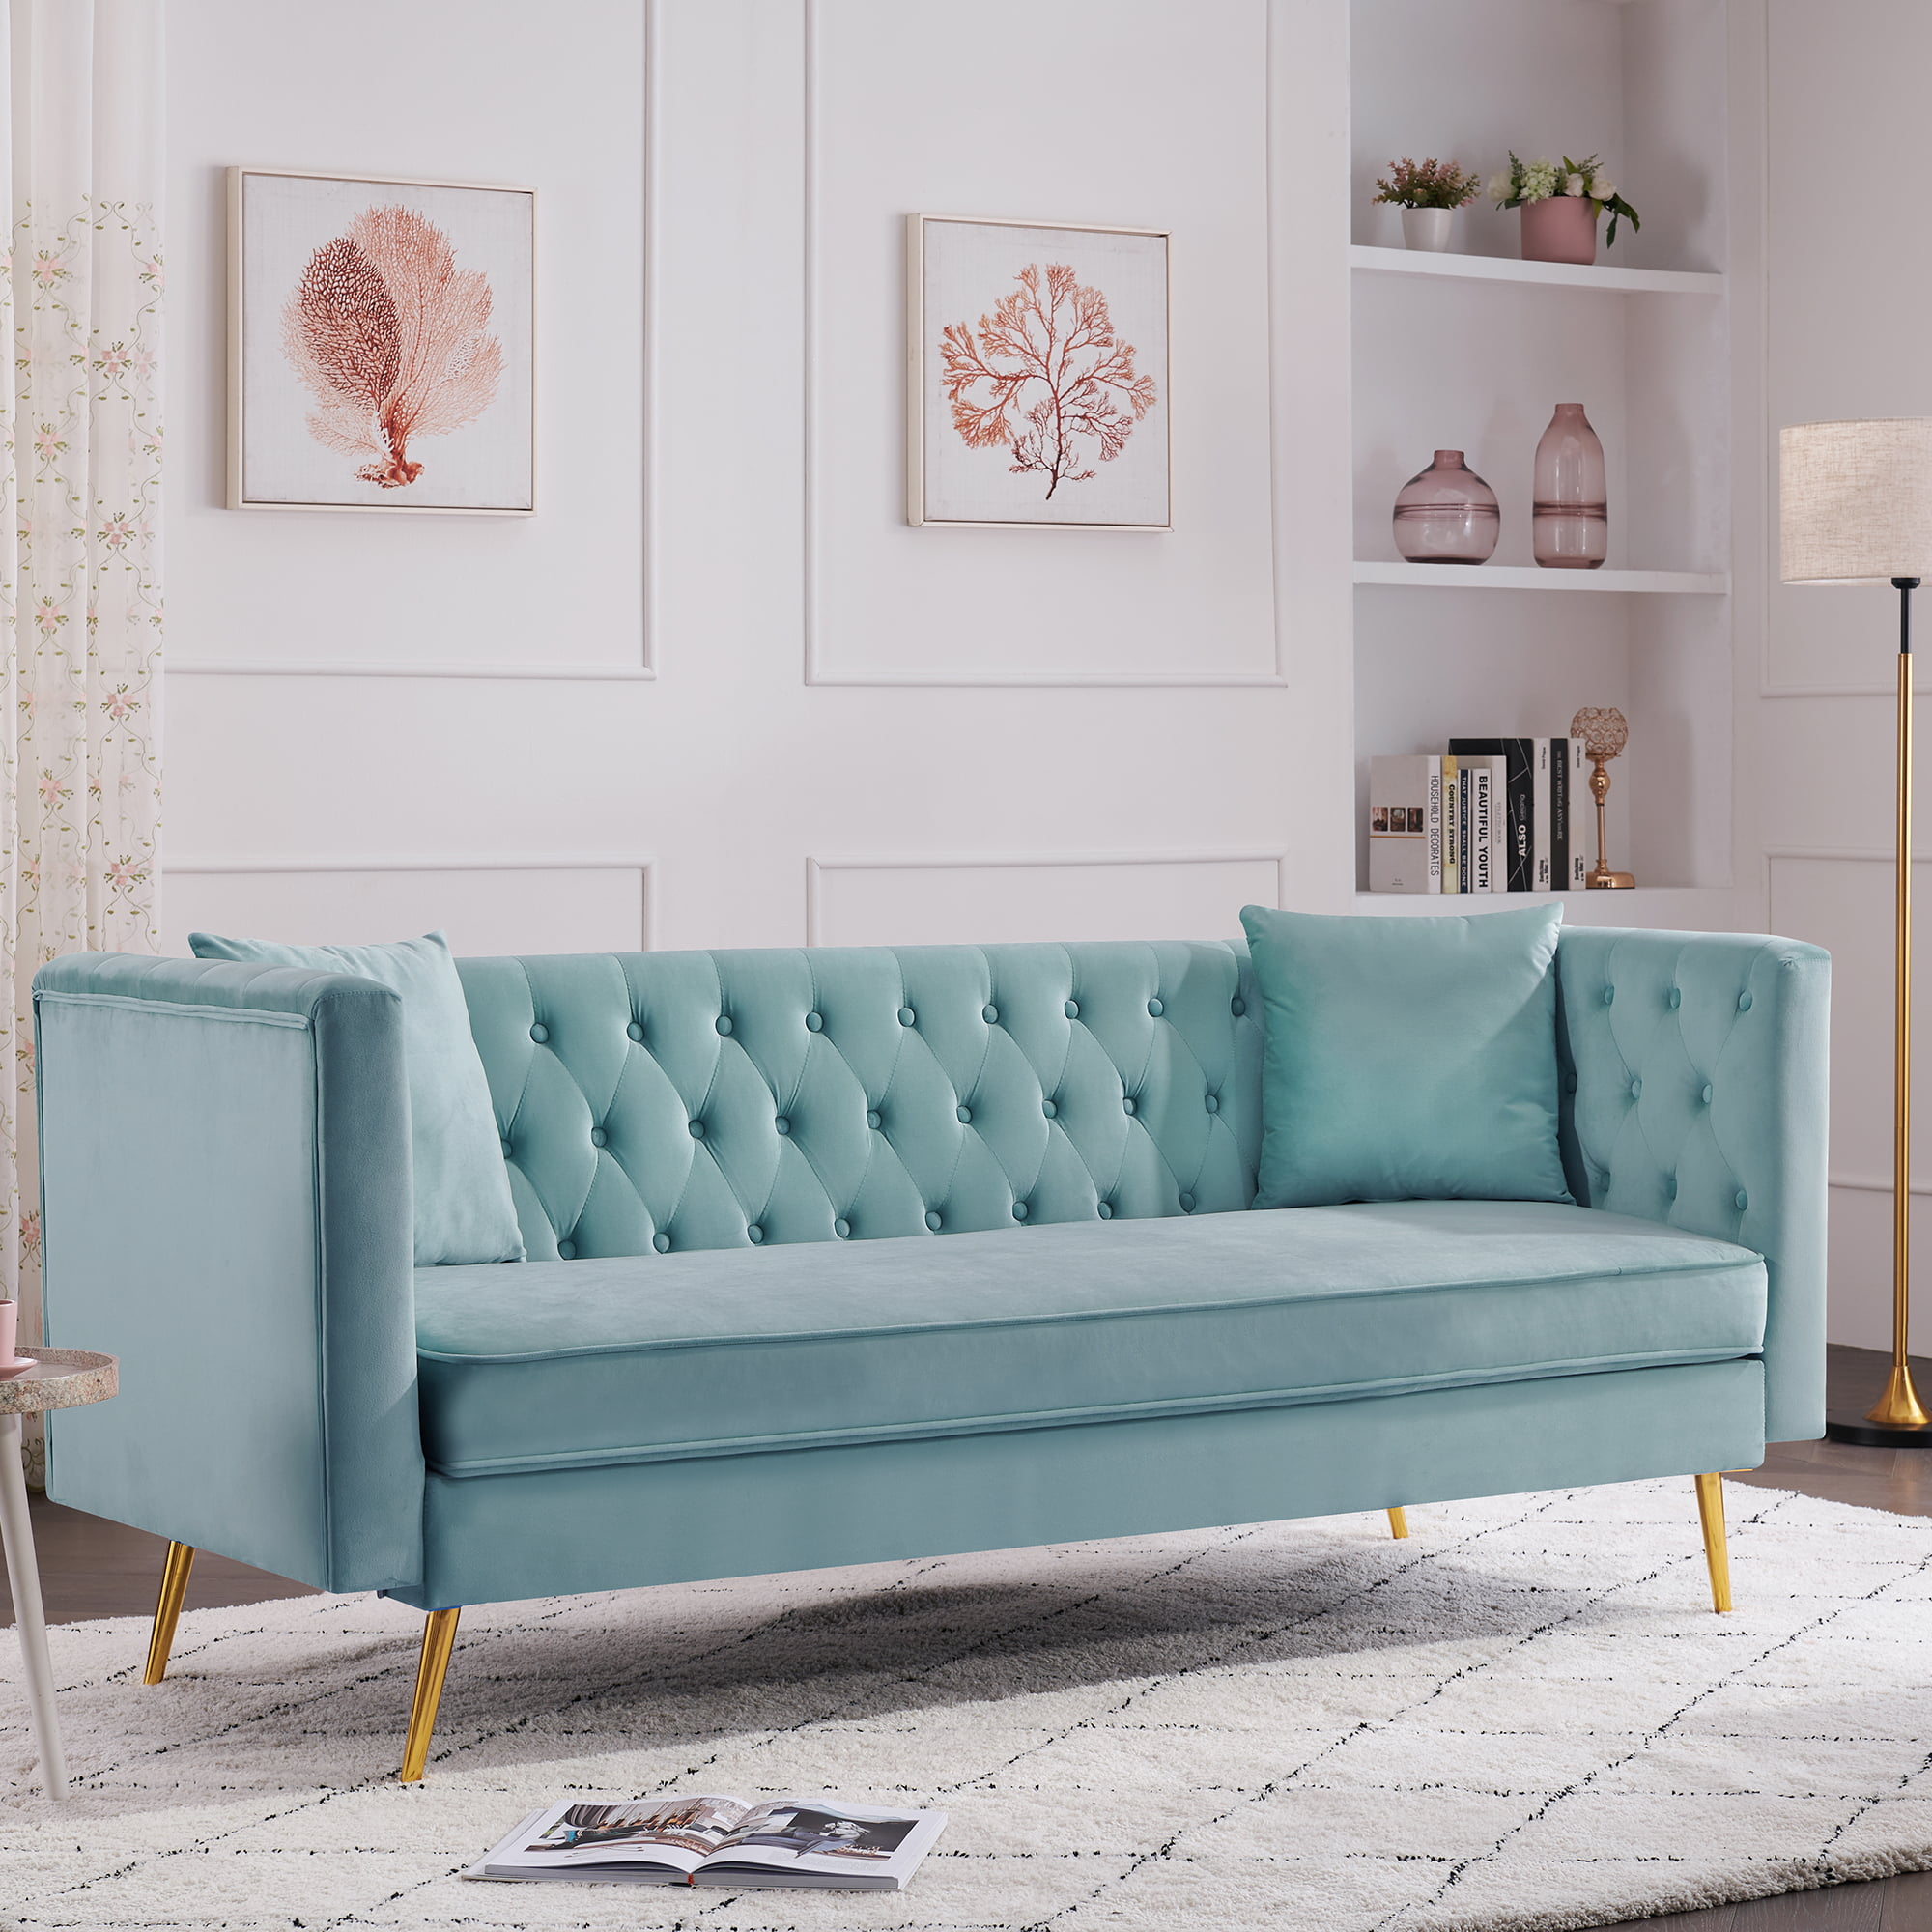 Ouyessir Velvet Upholstered Tufted Sofa with Two Pillows, Couch for Small  Space, Metal Legs, Velvet Sleeper Sofa，Teal couch / futon